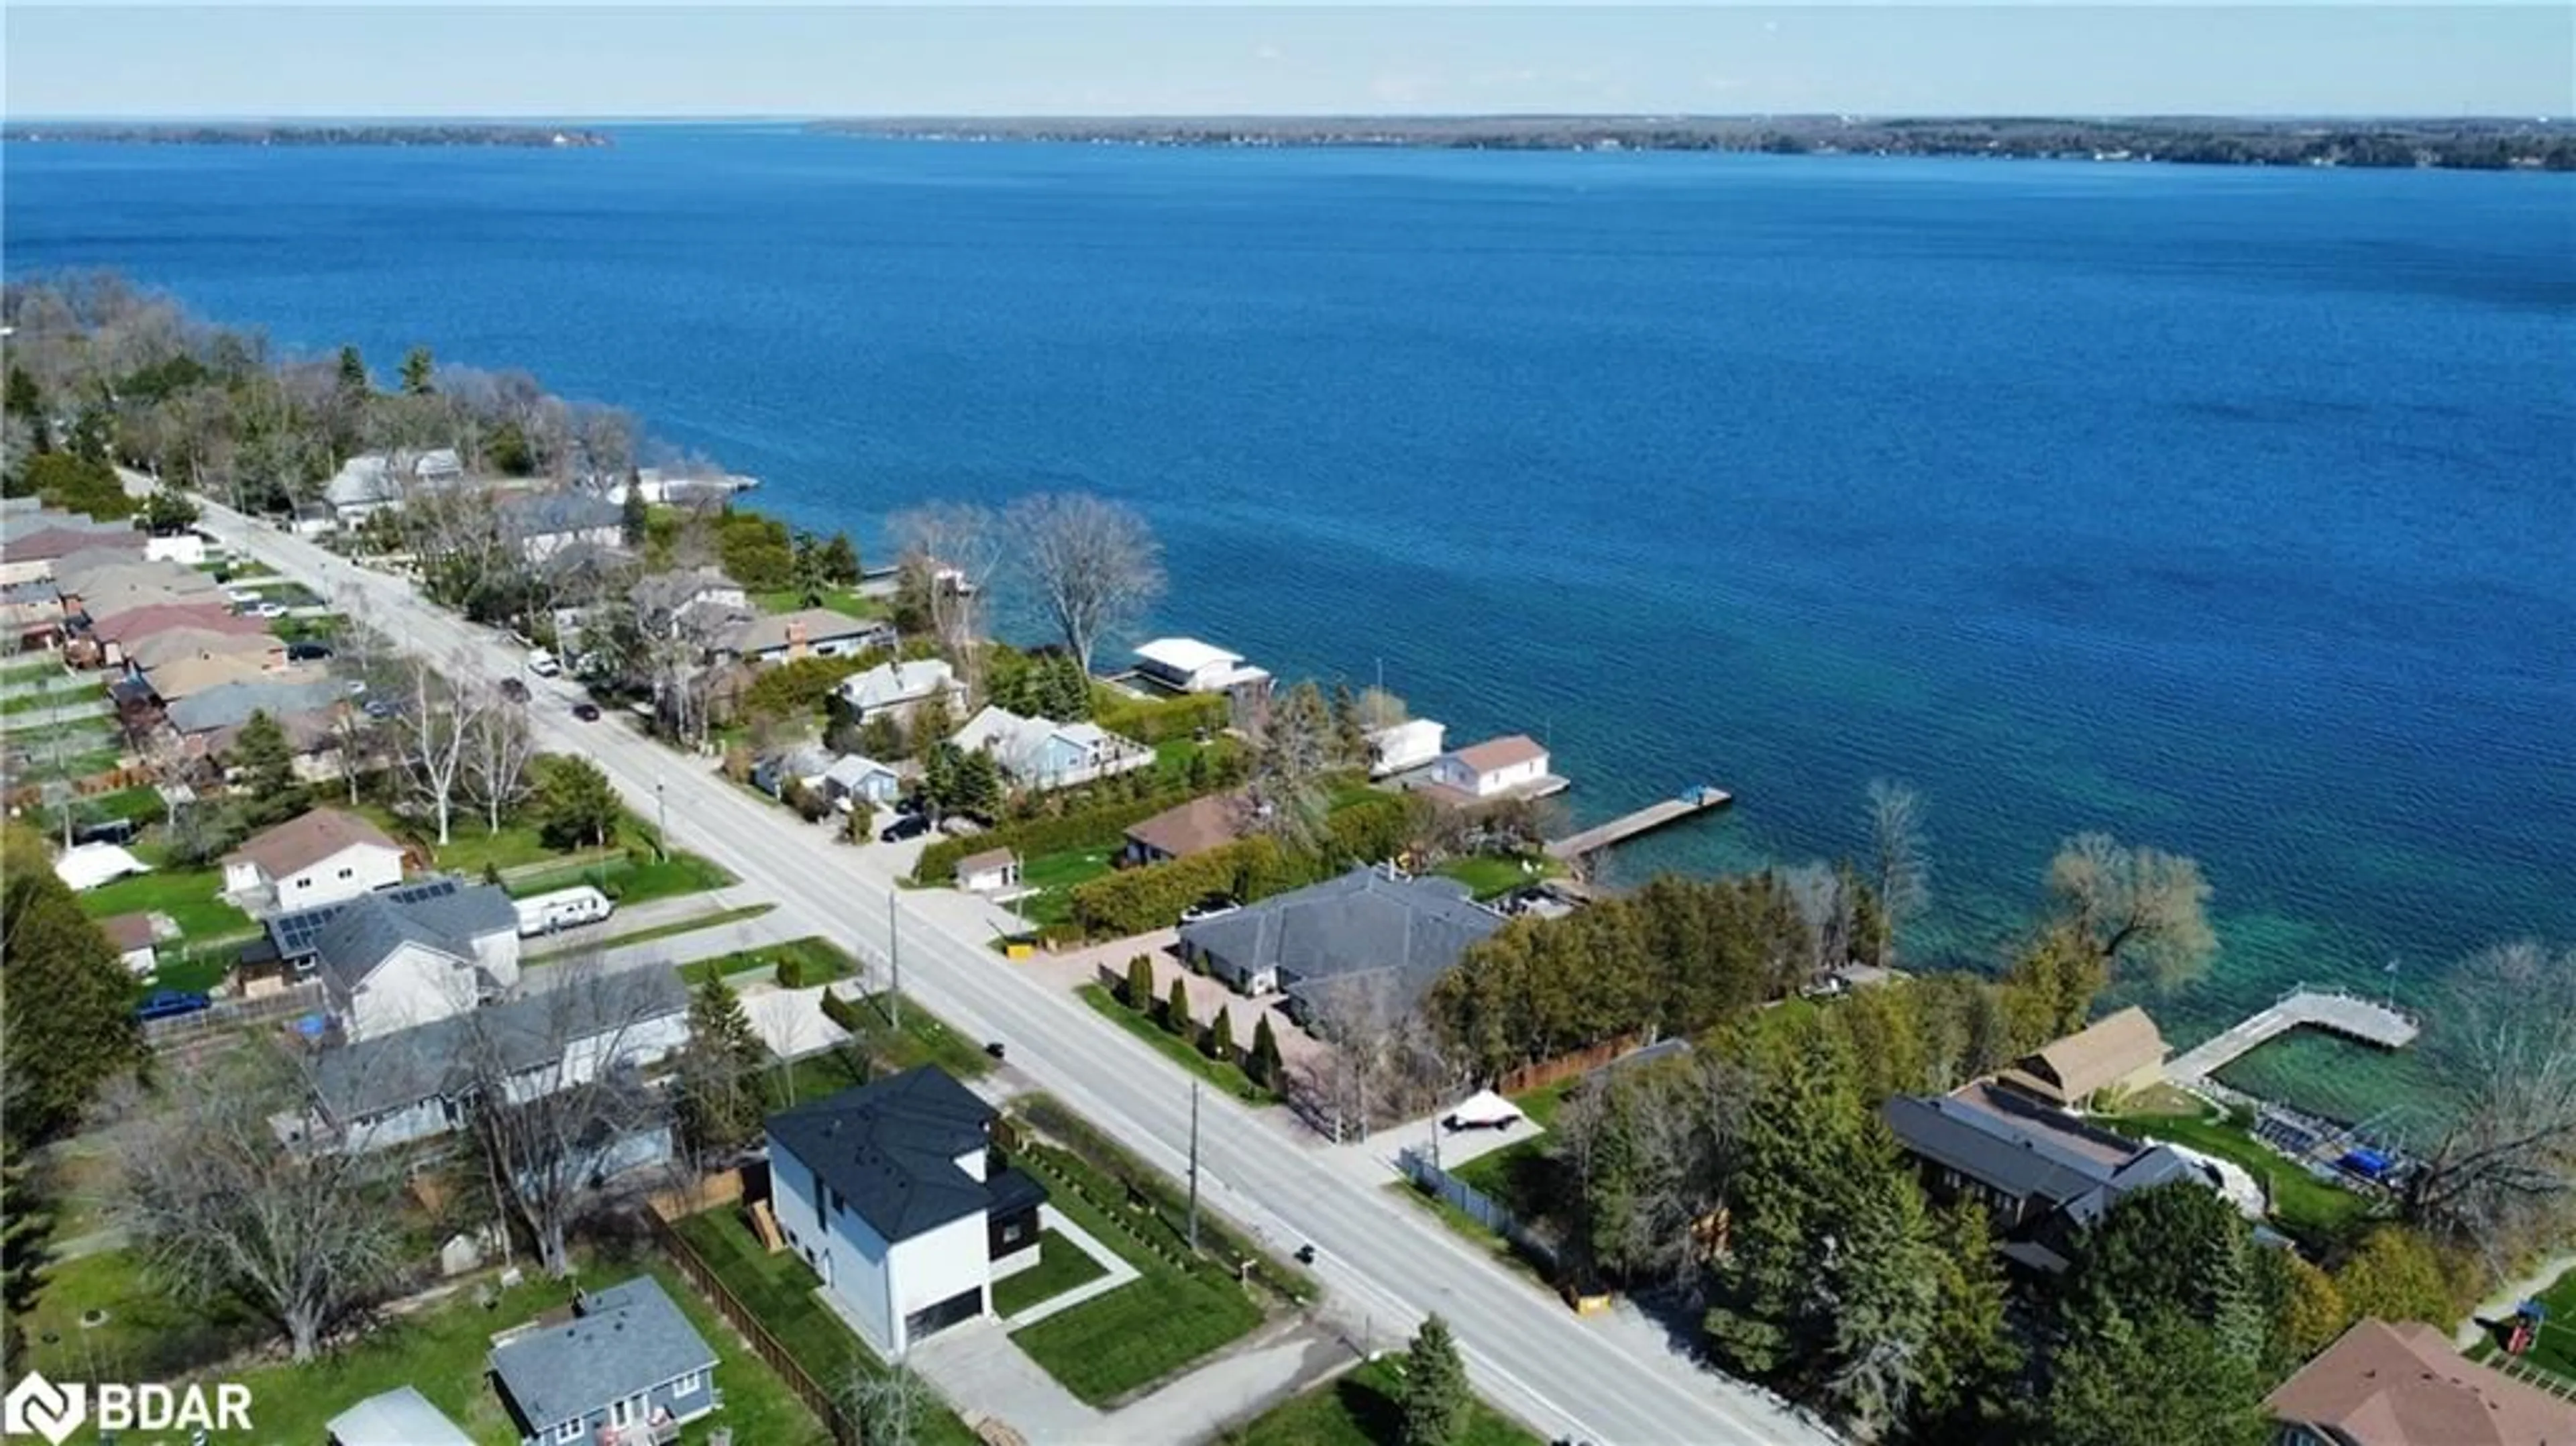 Lakeview for 1411 Maple Way, Innisfil Ontario L9S 4R1